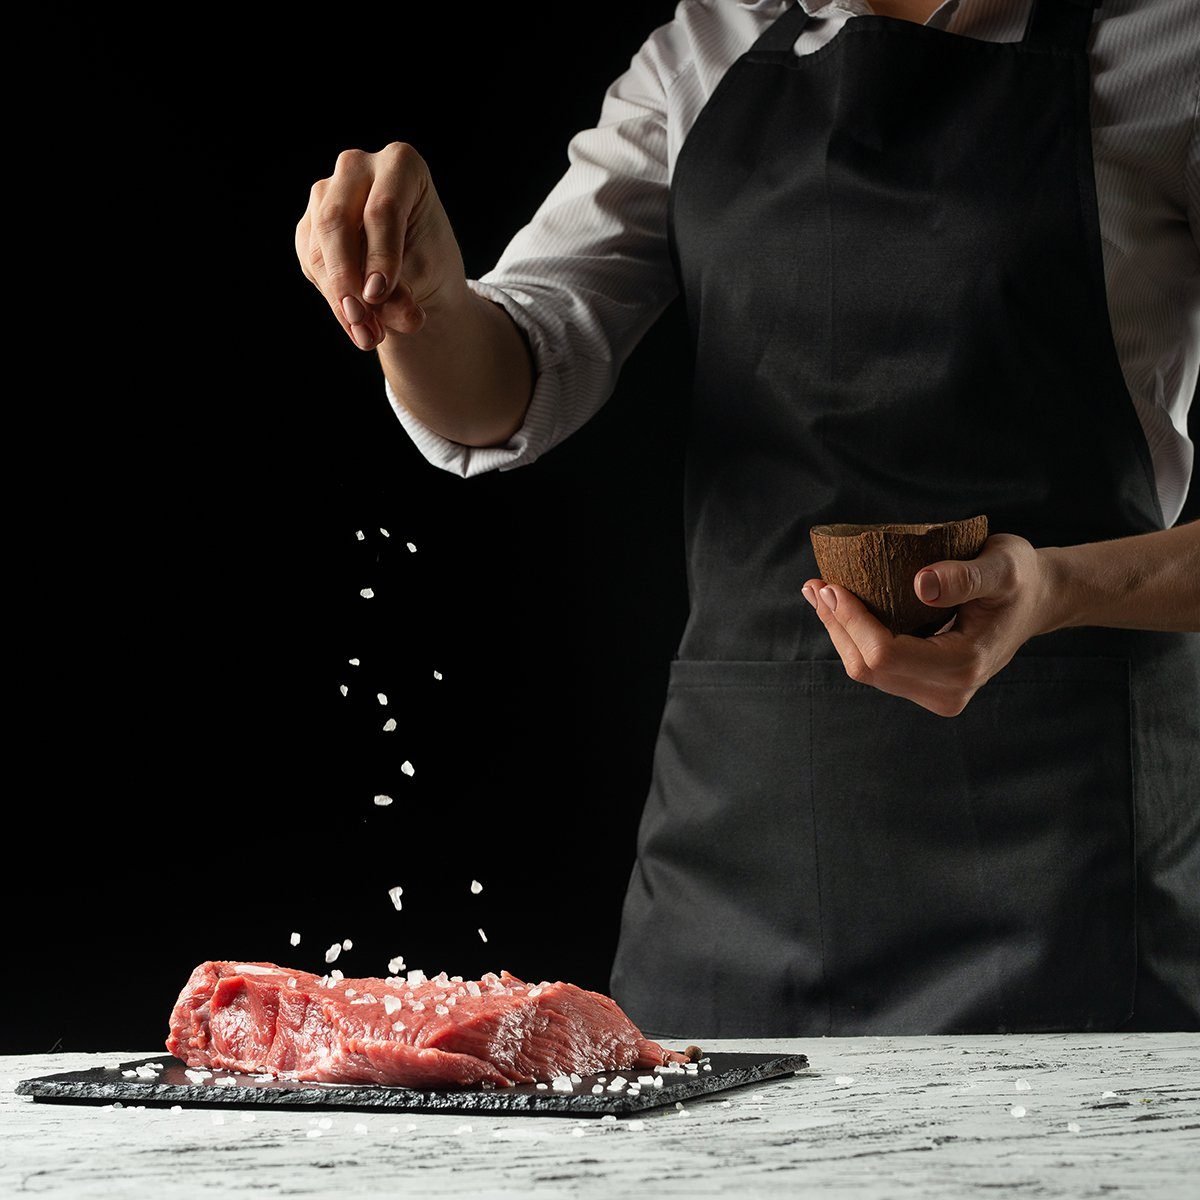 Preparation of the chef by steak cook.